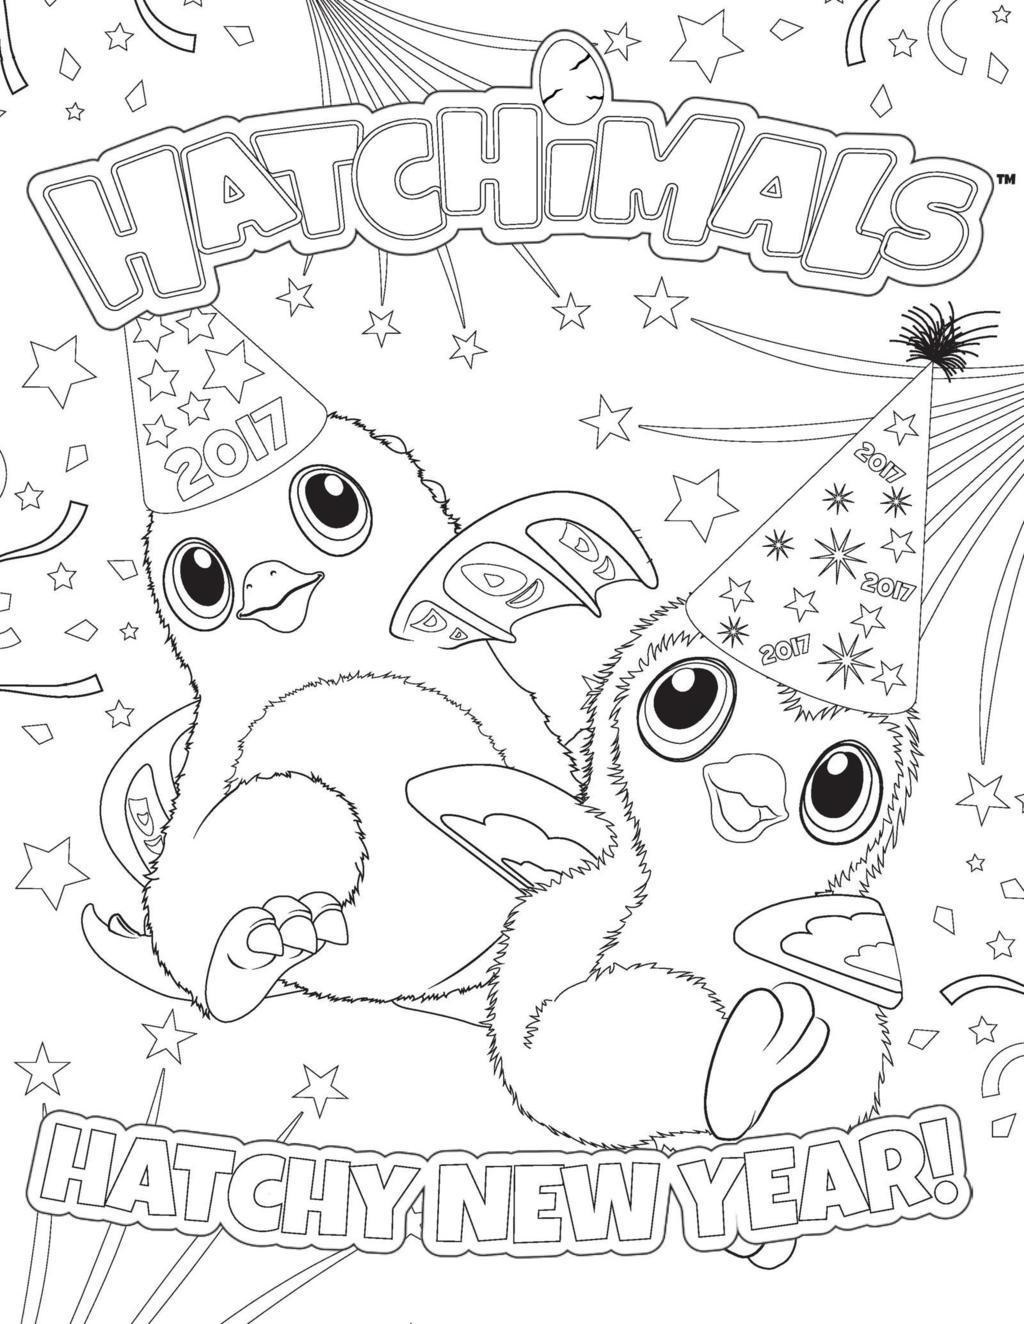 Hatchimals Coloring Pages The Pagee For Adults Fantasy Kids To Print And  Color – Approachingtheelephant